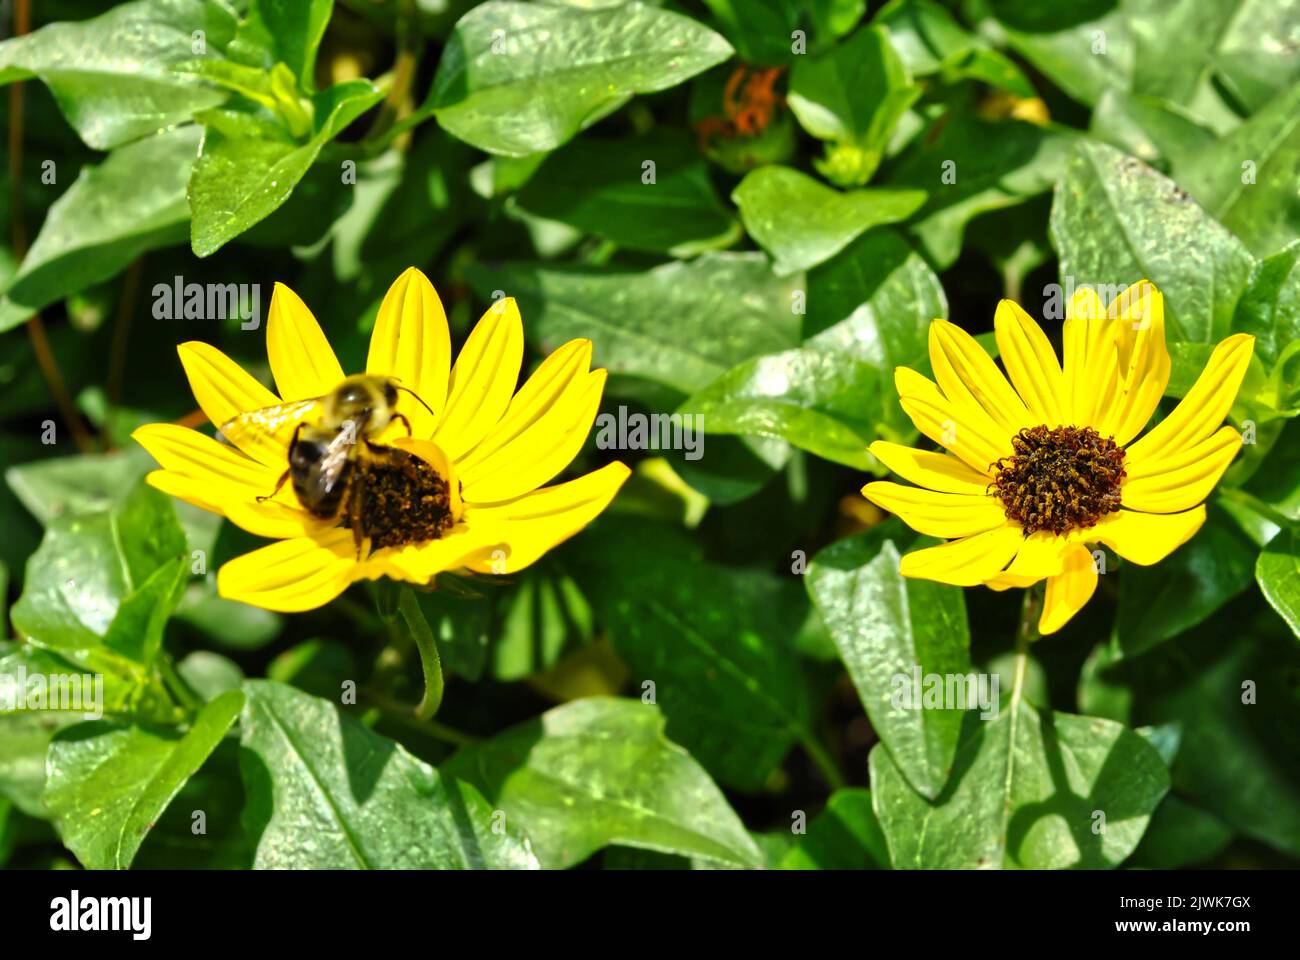 Helianthus debilis Latin name Beach sunflower flowers with a bee on the flower in a garden Stock Photo